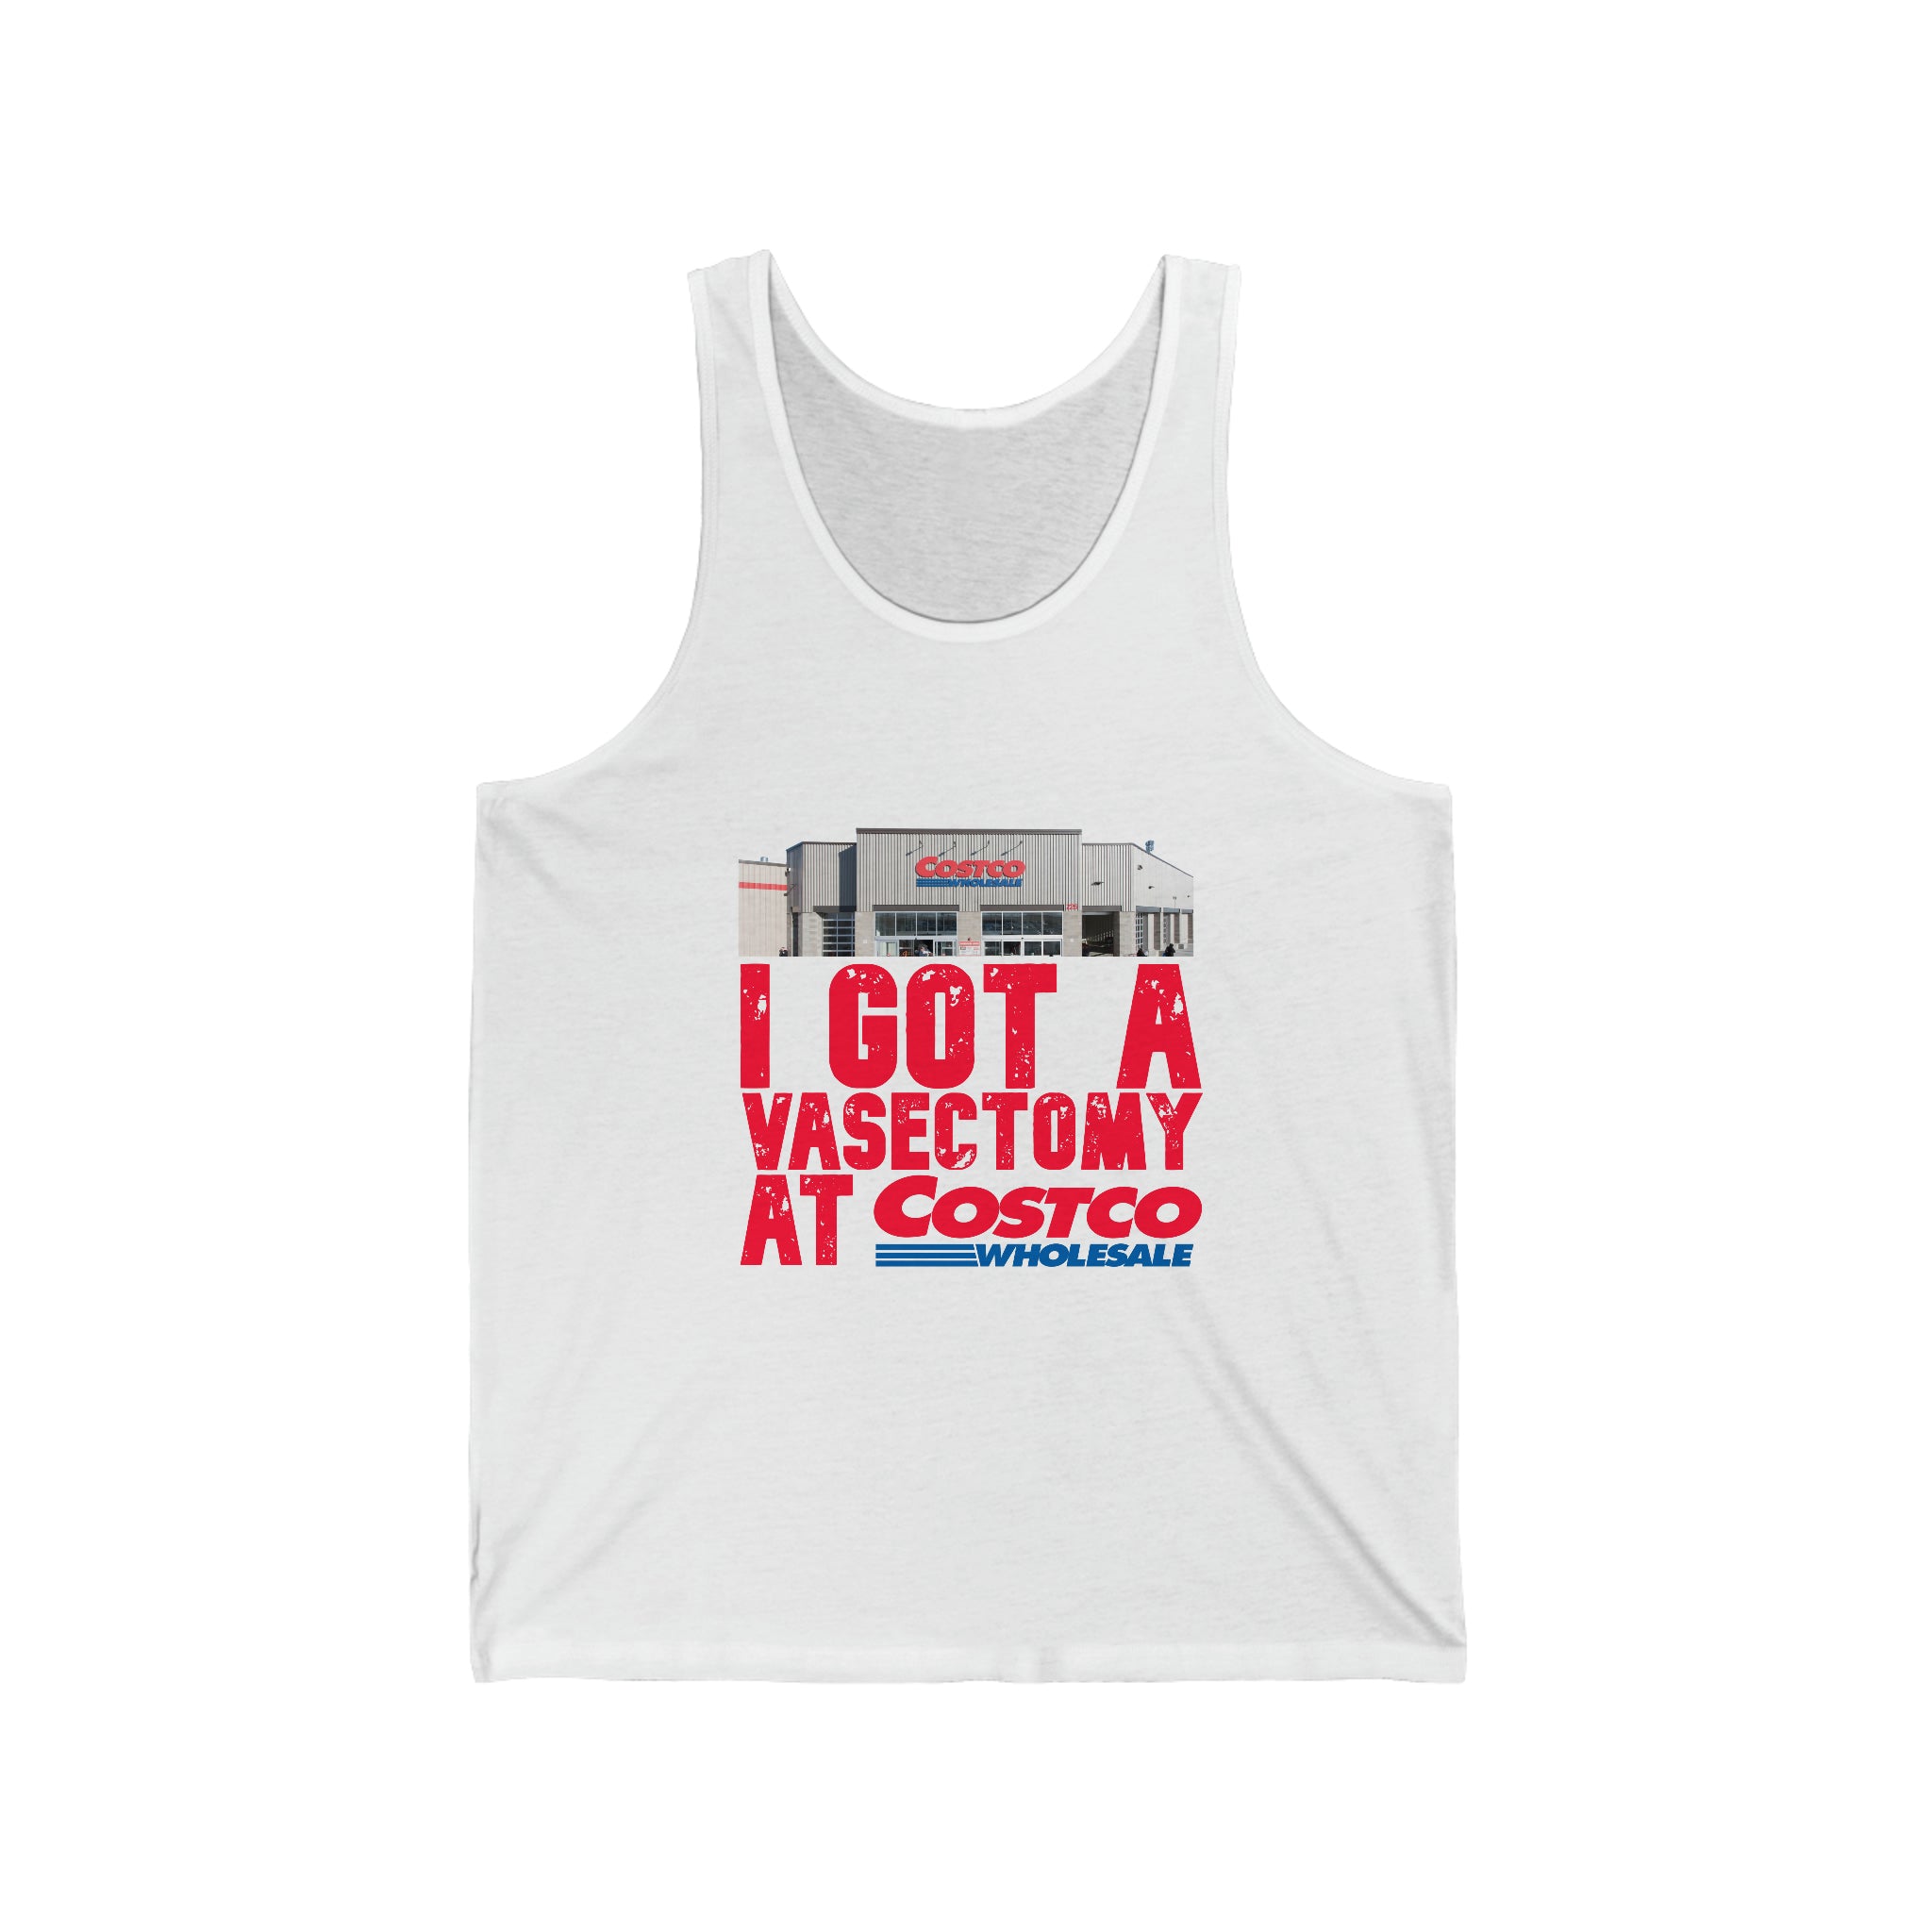 I got a vasectomy at costco - Unisex Jersey Tank